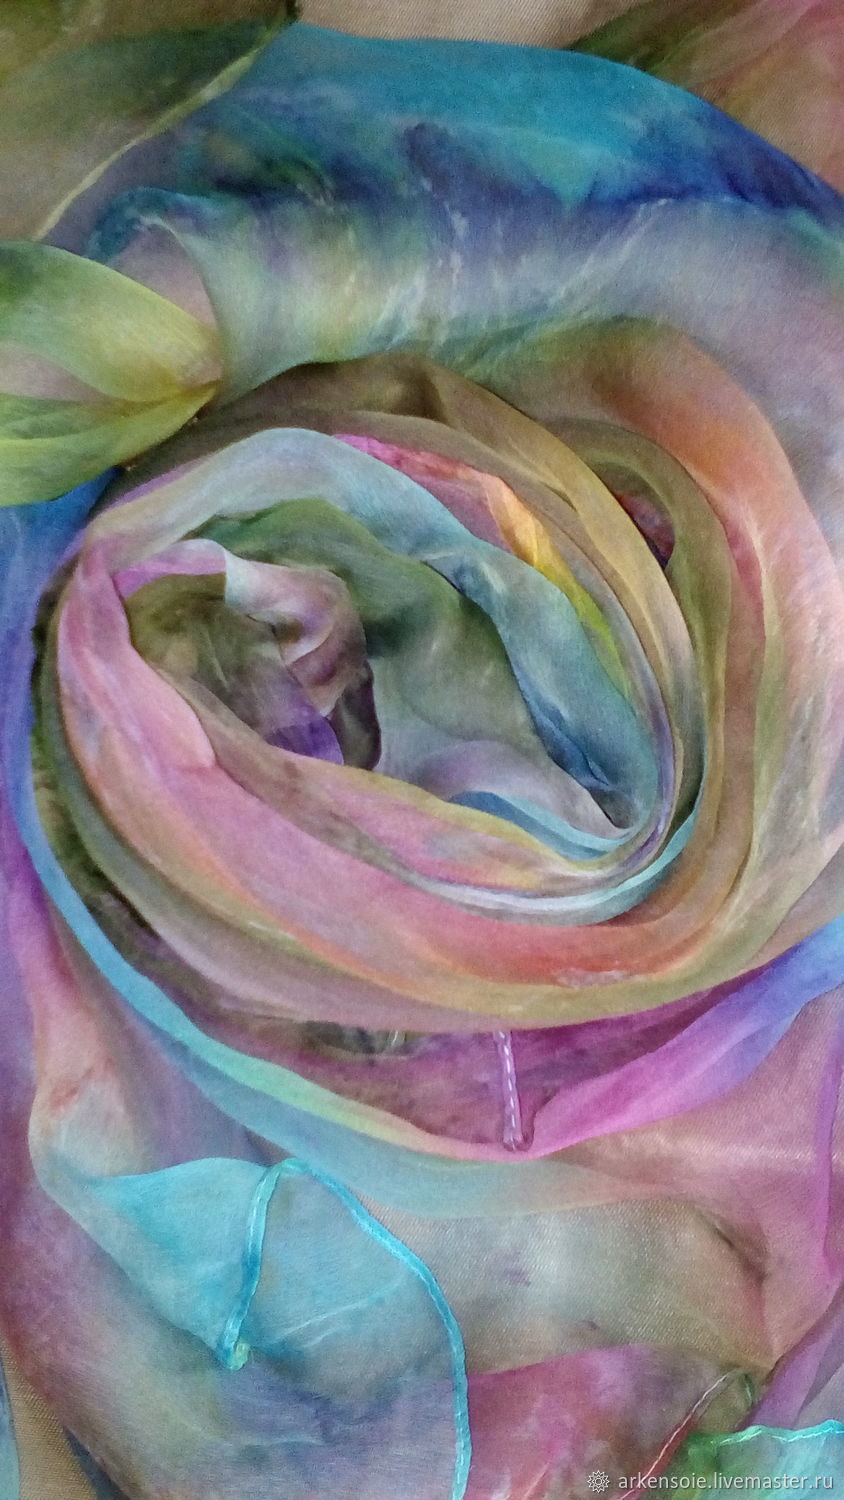 Scarf silk-chiffon, All colors of autumn,hand-painted,110h170 cm
